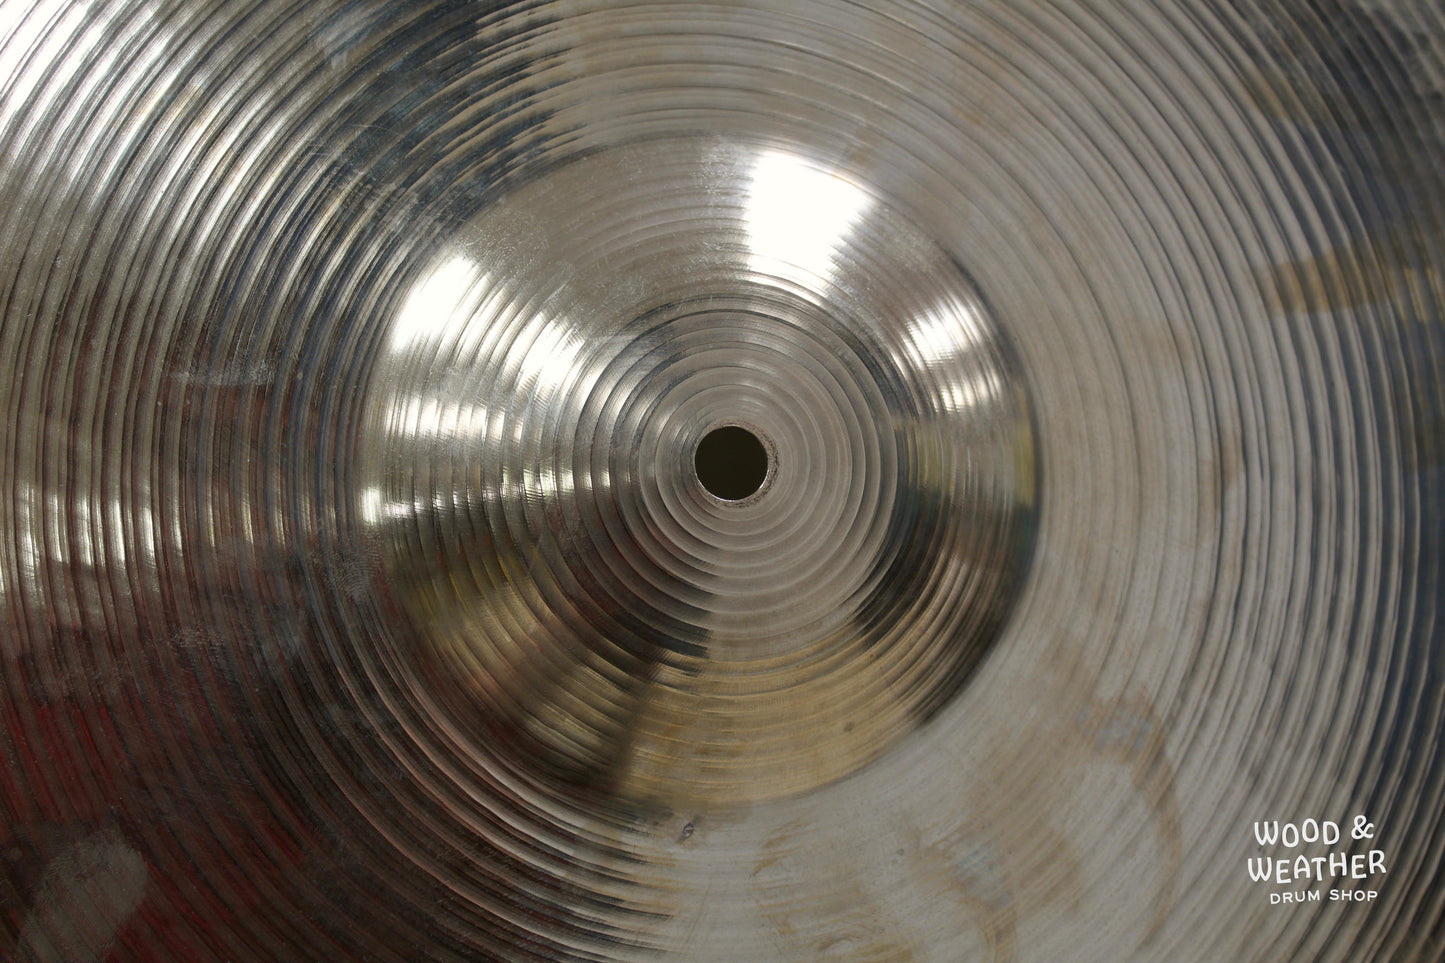 1960s Paiste 18" Solid Stamp Crash Cymbal 1635g